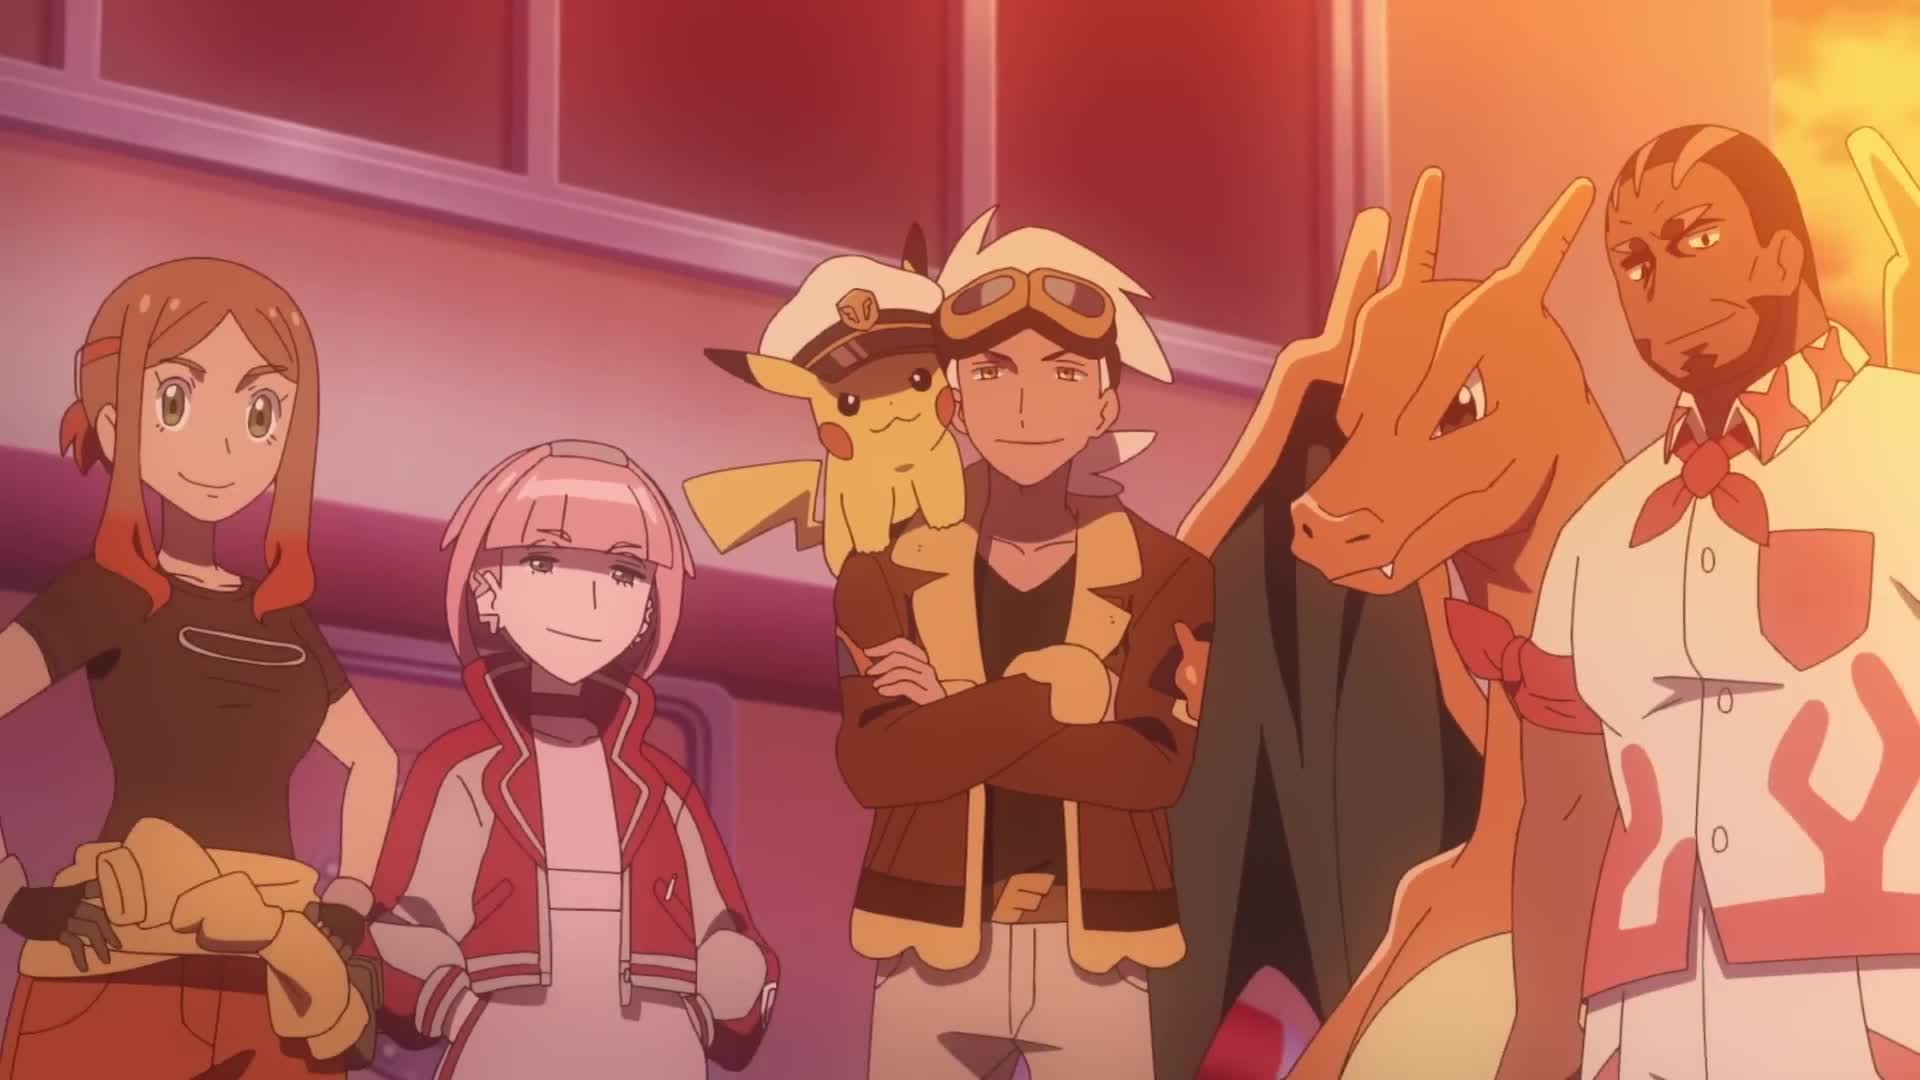 Pokemon Horizons episode 1-8 recap: What are our heroes up to?